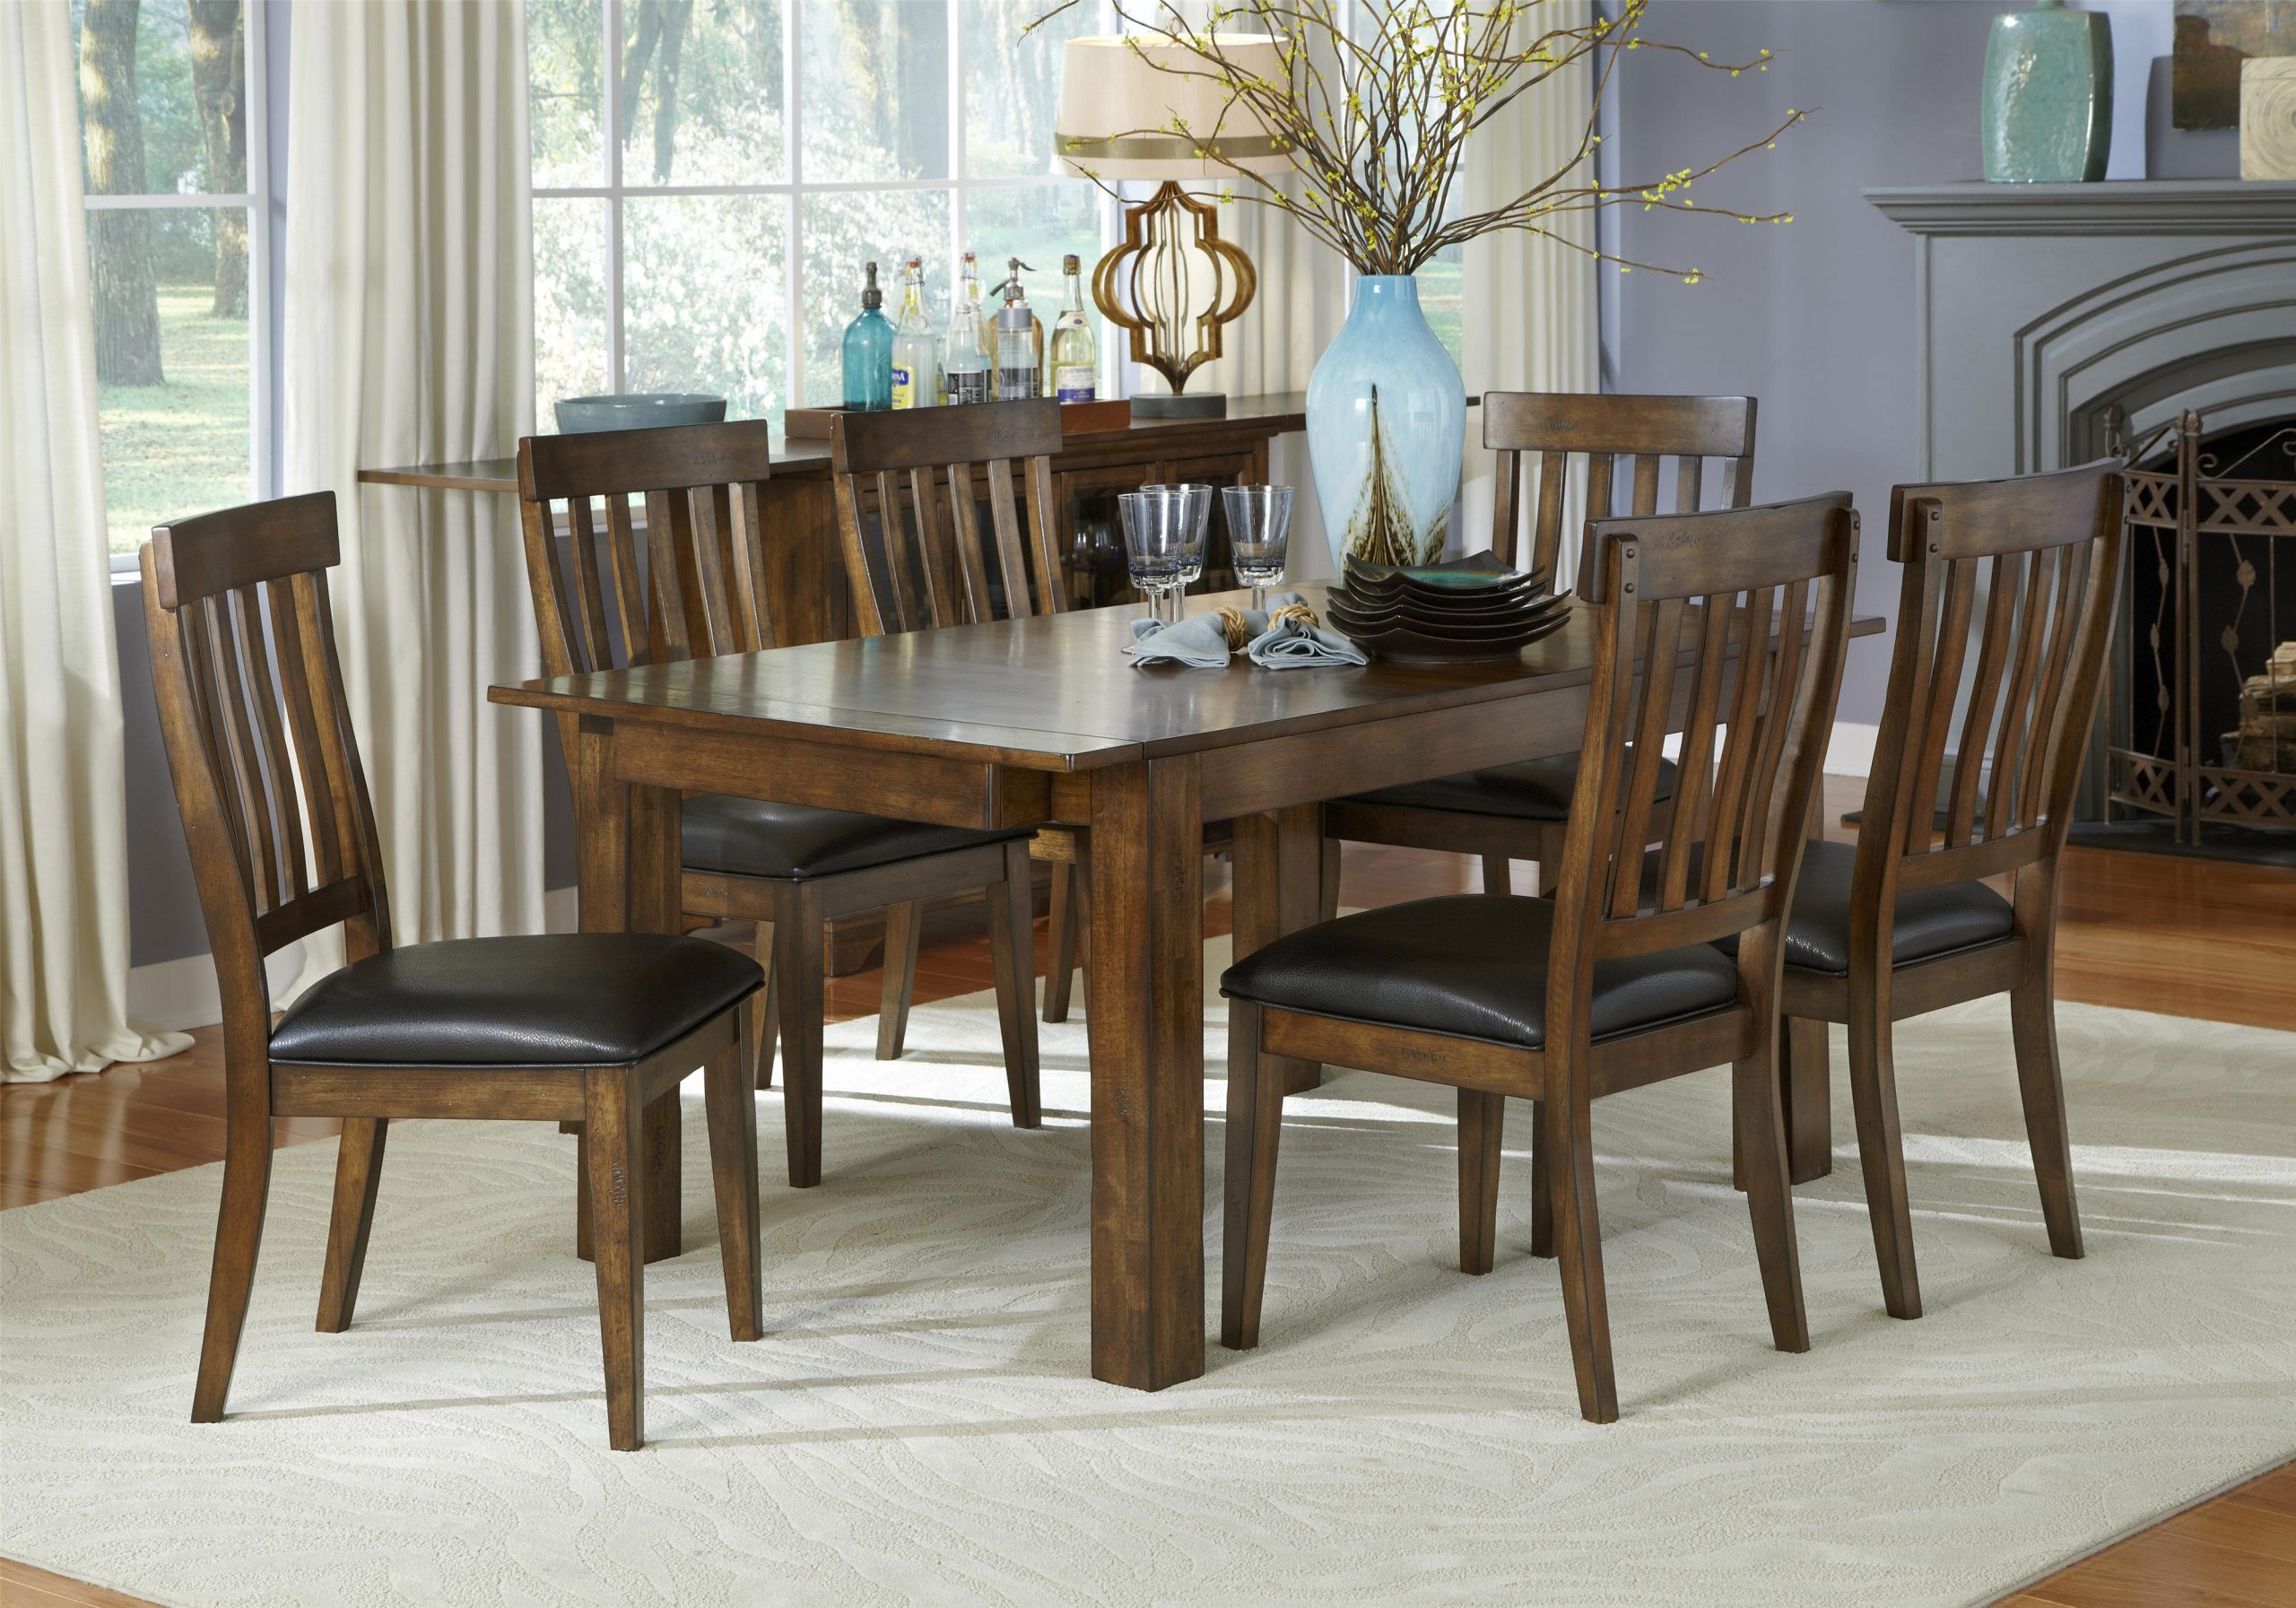 Mariposa 7 Piece Table And Chairs Set for size 4000 X 2802